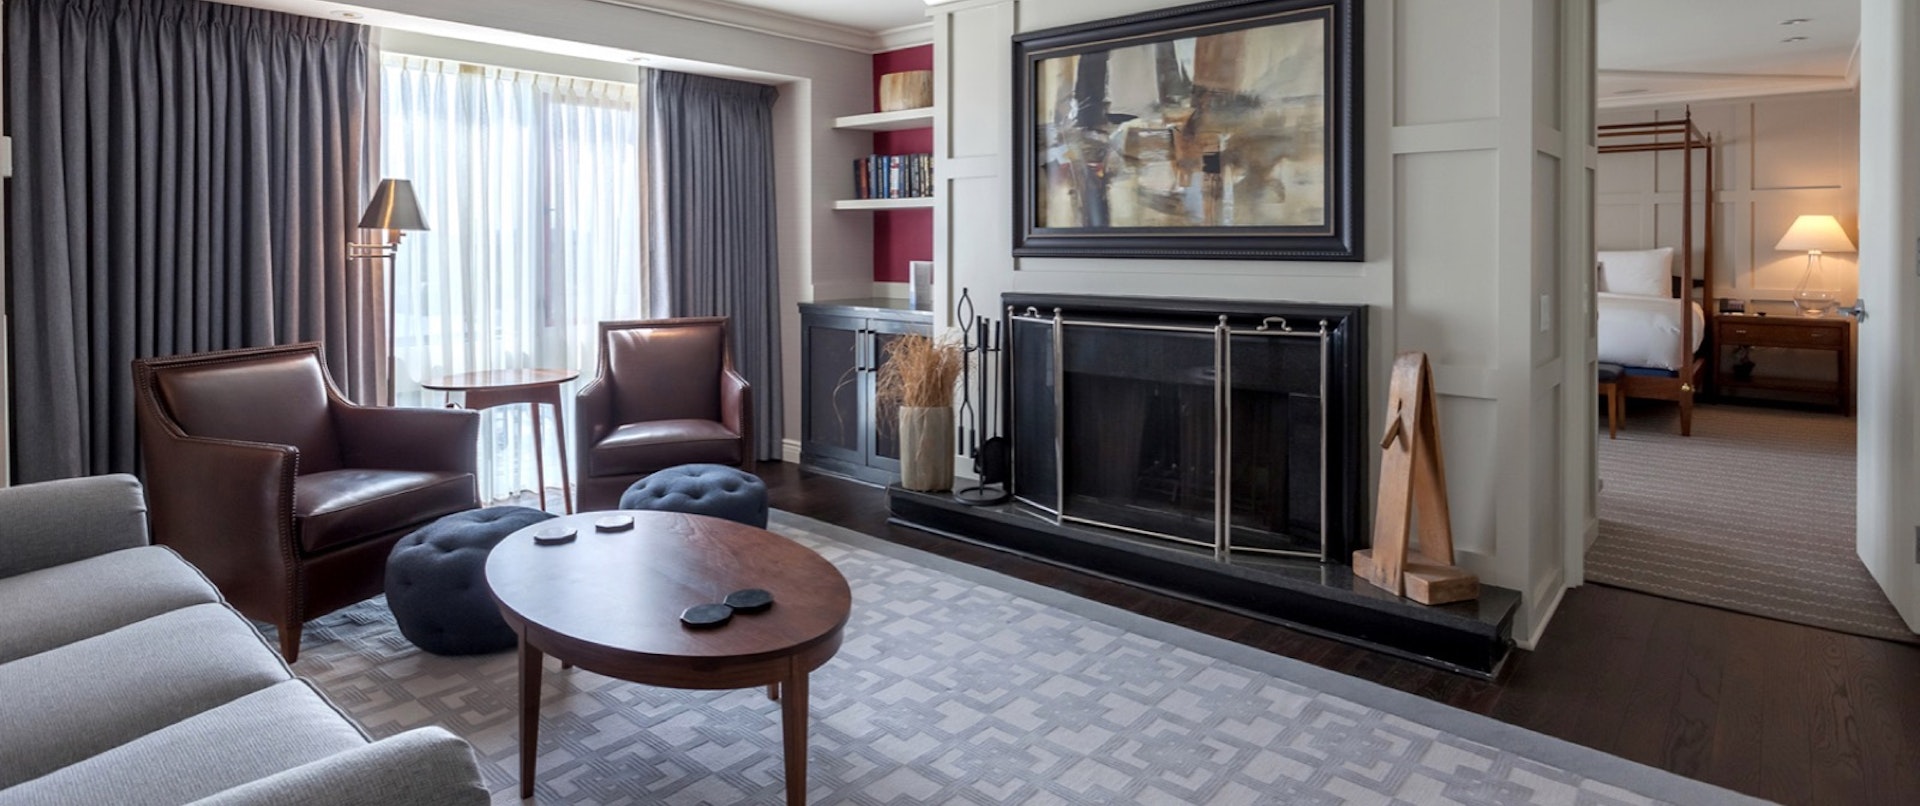 Inside the Charles Hotel presidential suite, with a couch, chairs and coffee table in front of a fire place